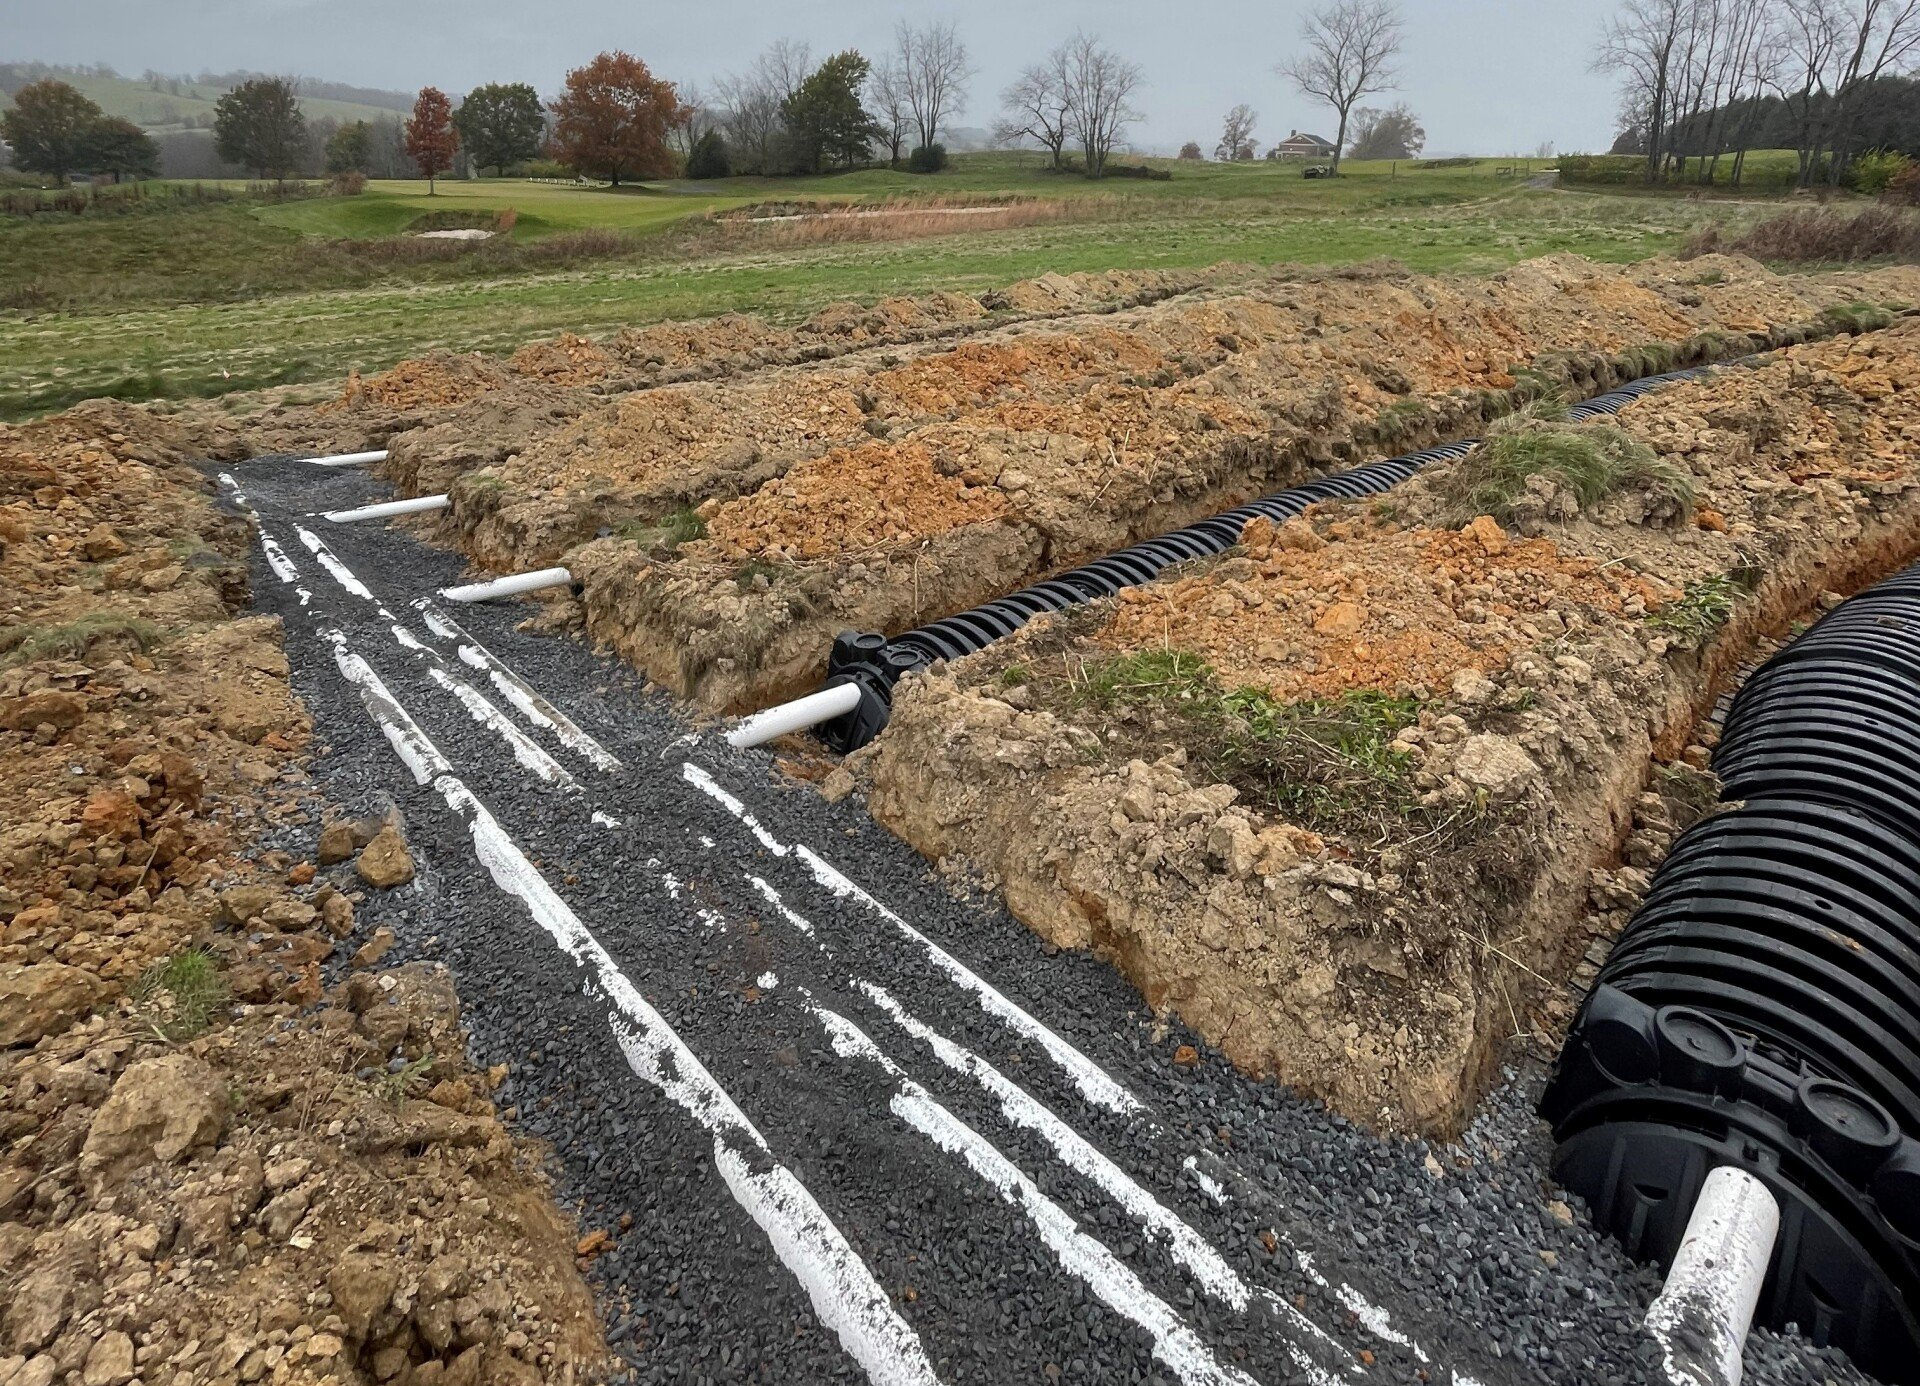 Septic Systems Installation in a Field - Abingdon, VA - Complete Plumbing Septic & Drain Solutions